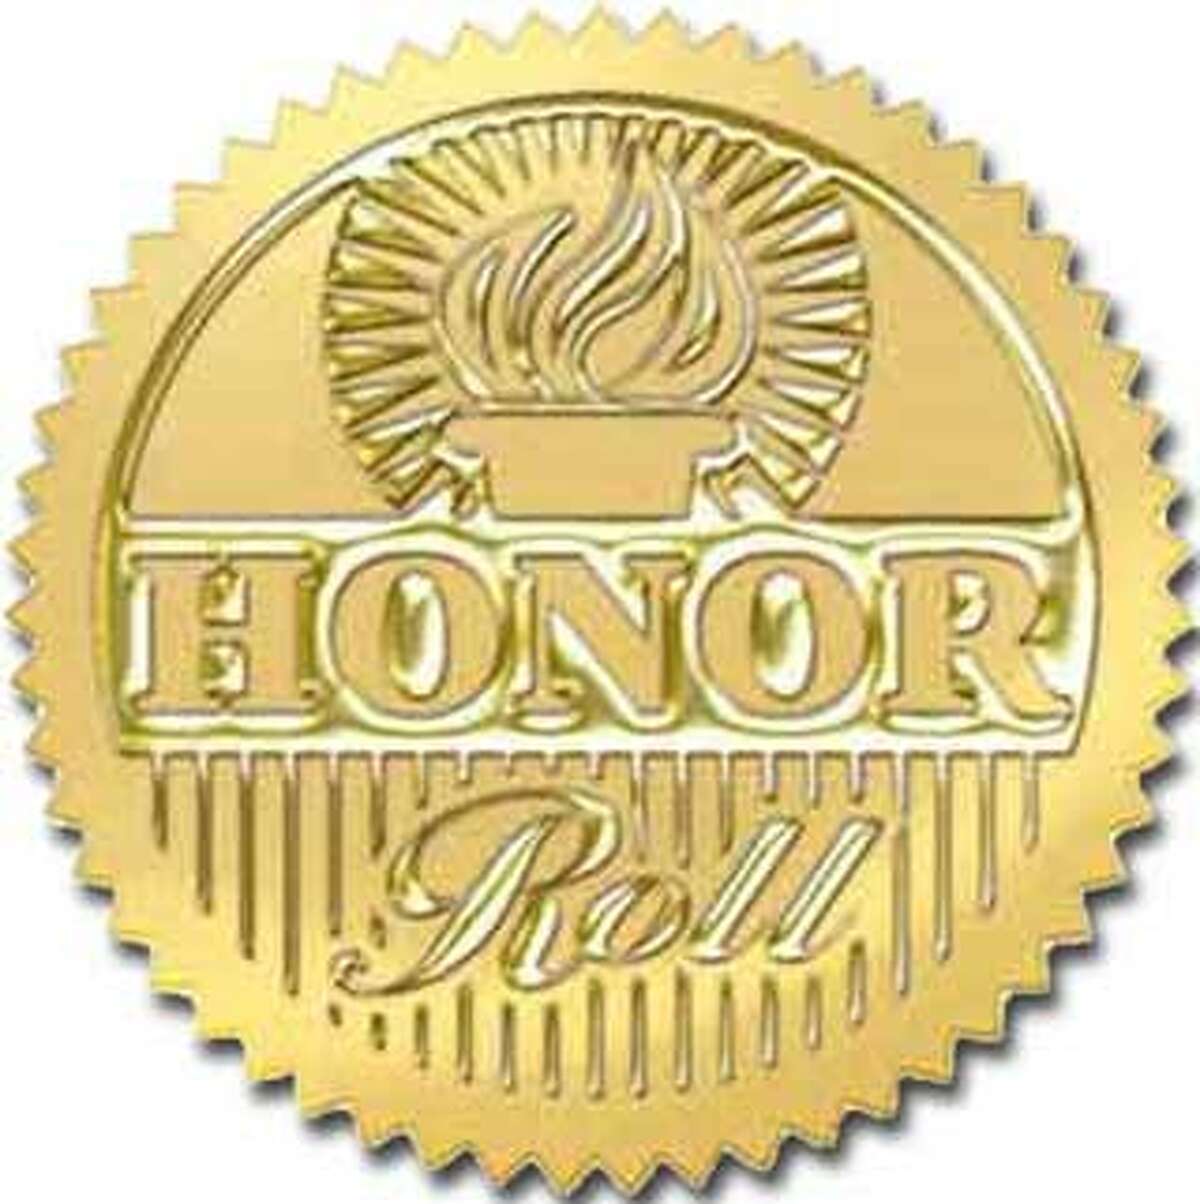 On the Honor Roll